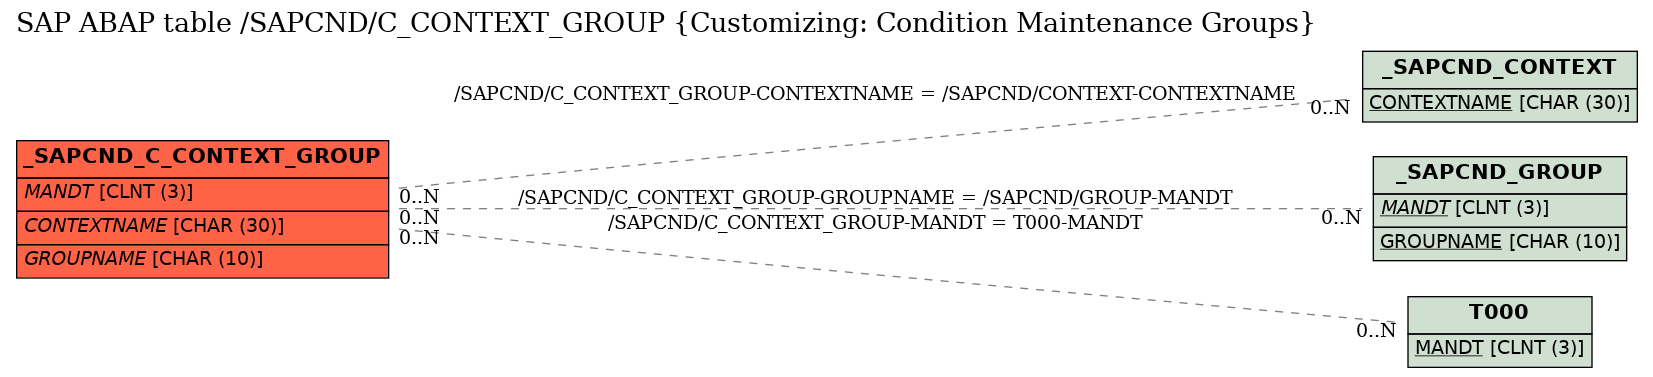 E-R Diagram for table /SAPCND/C_CONTEXT_GROUP (Customizing: Condition Maintenance Groups)